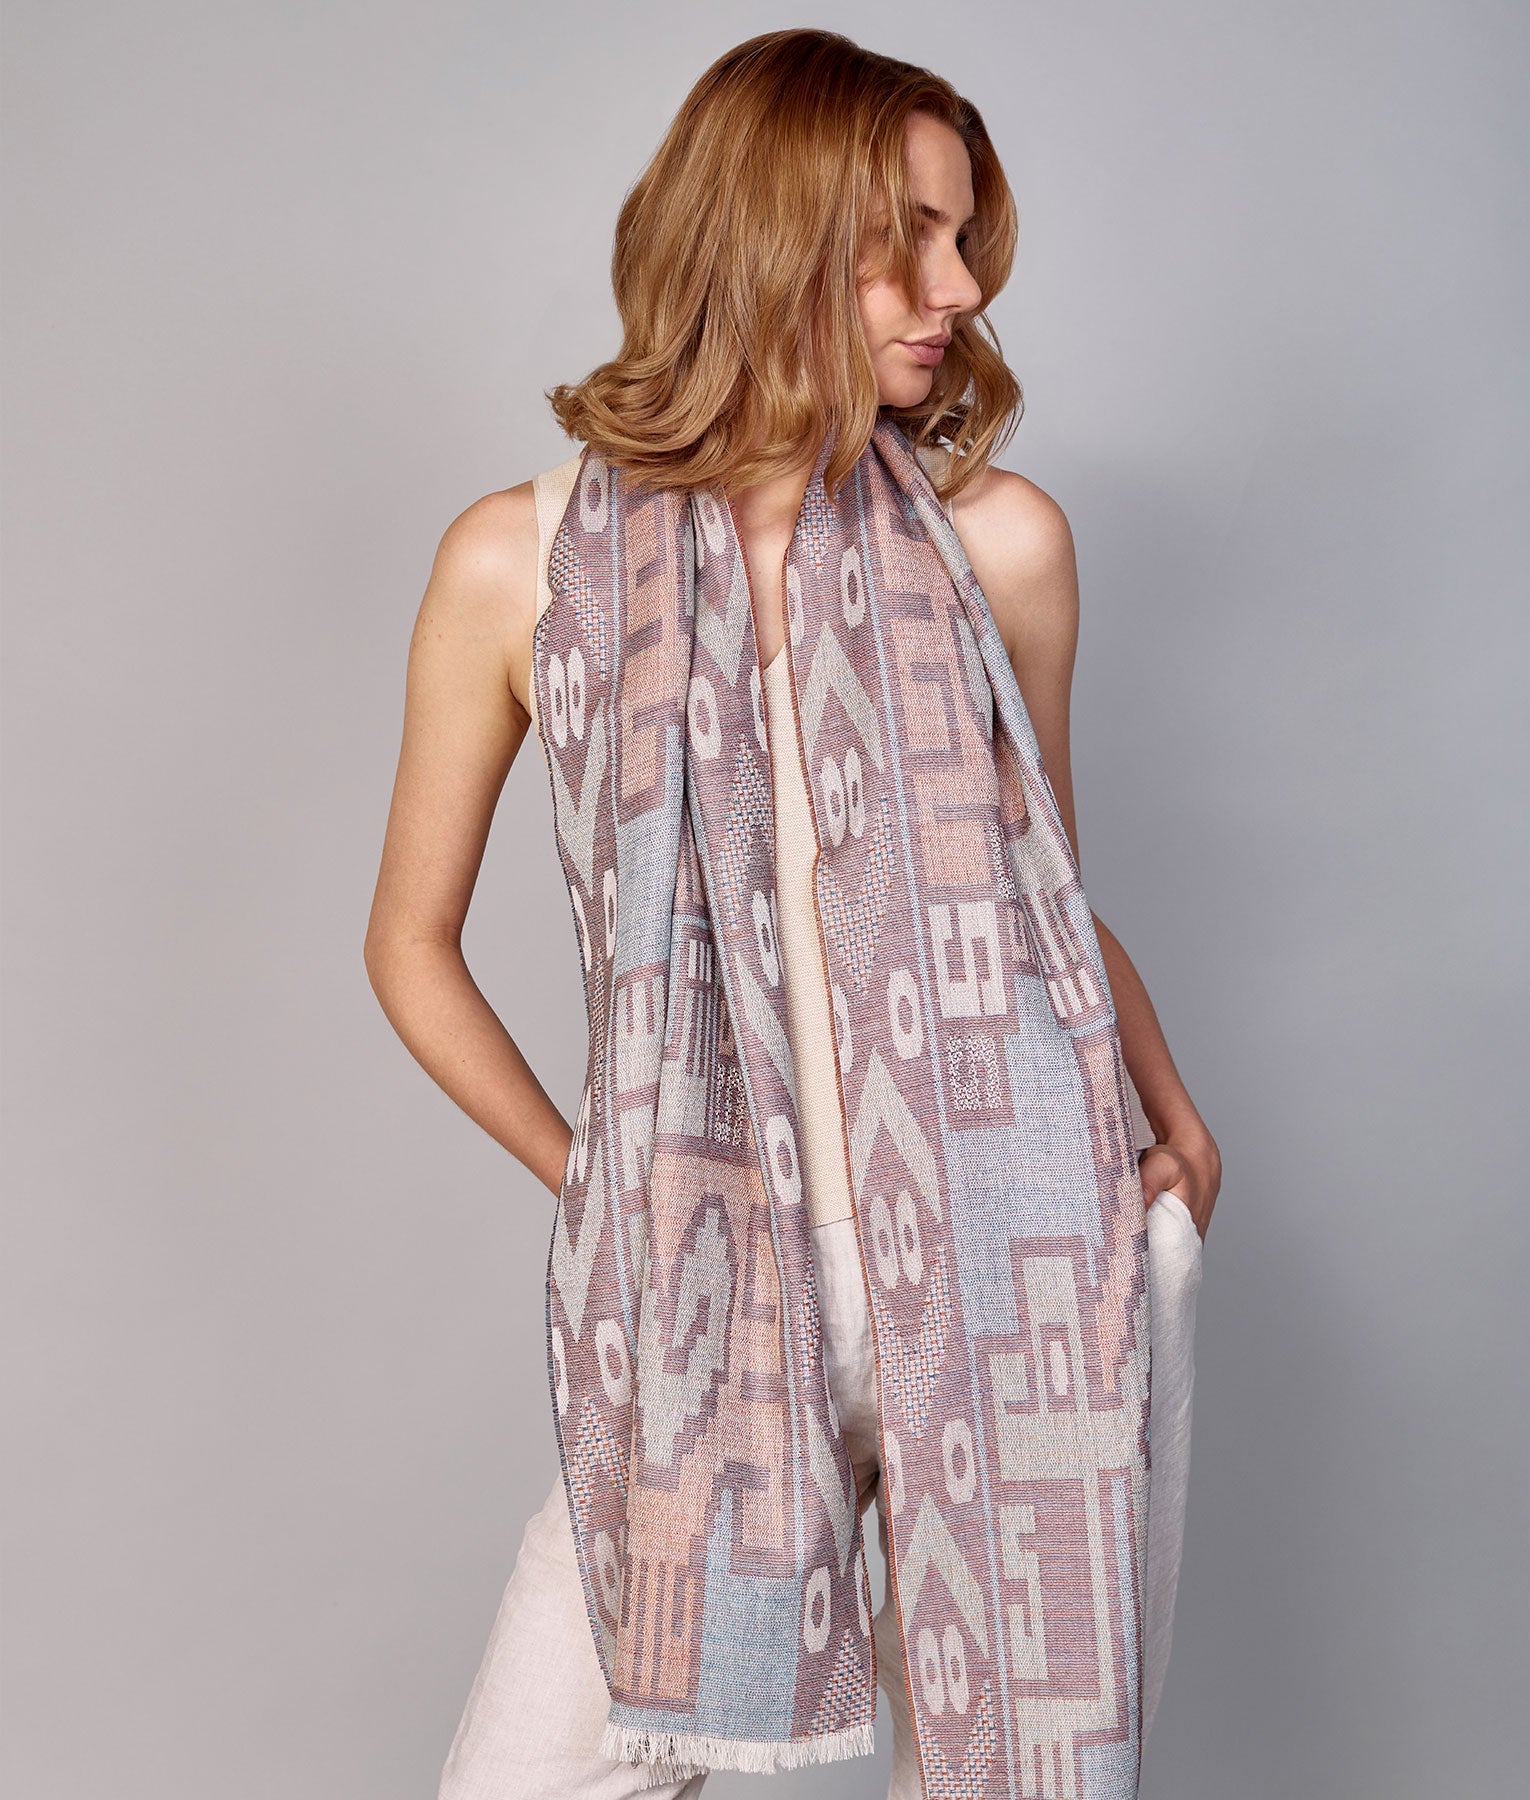 Nazca Dignified Forms Scarf C001